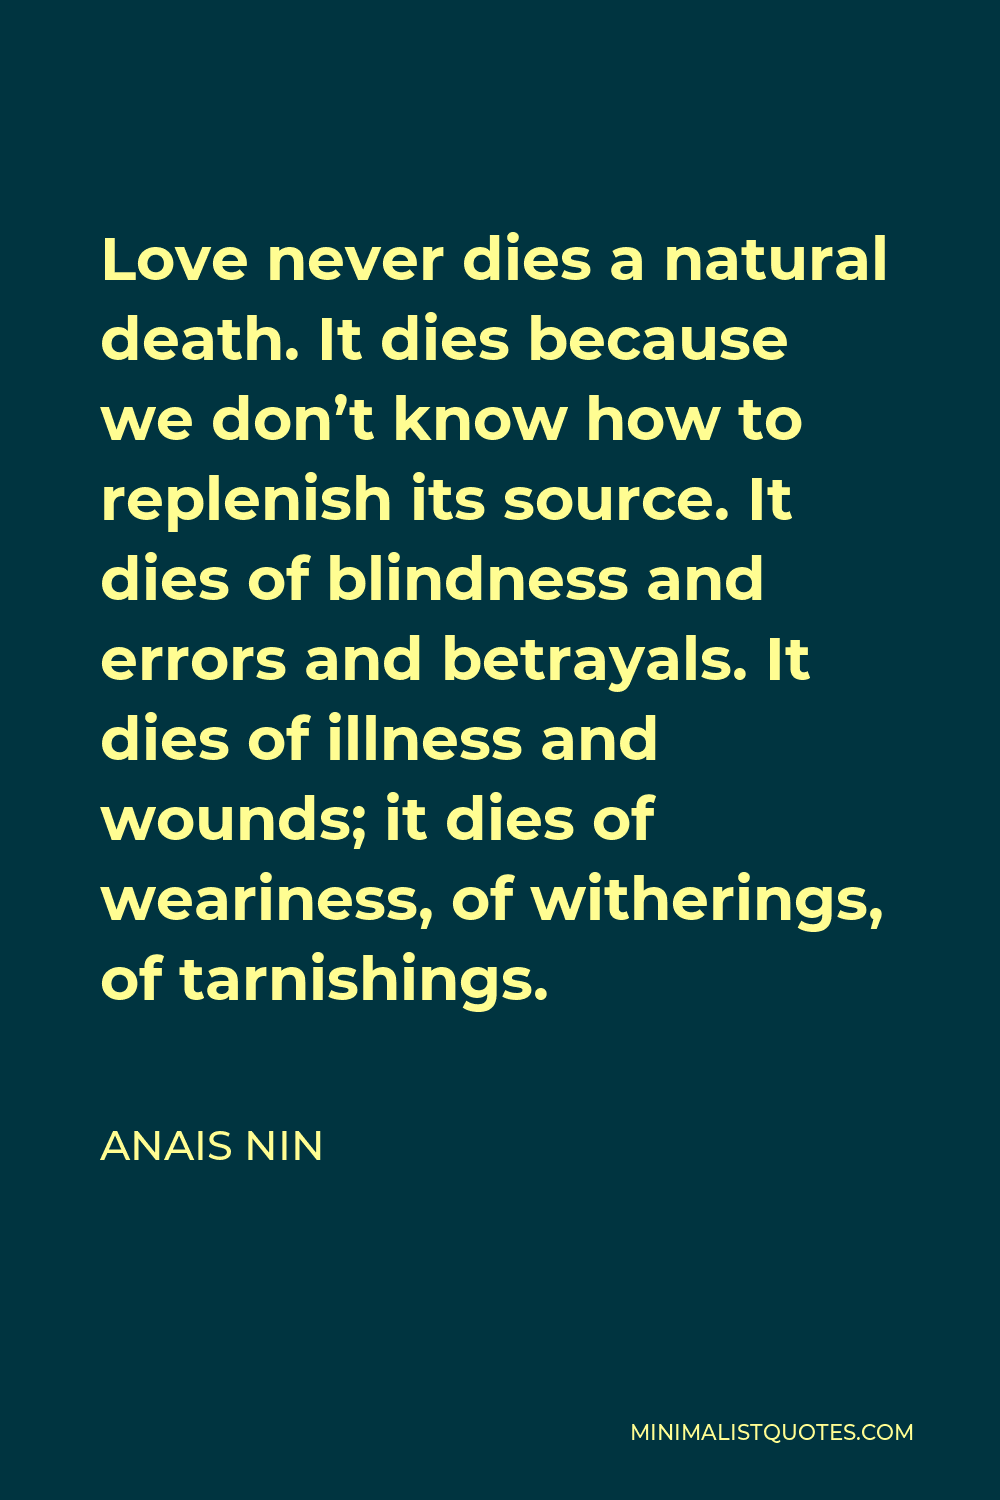 Anais Nin Quote - Love never dies a natural death. It dies because we don’t know how to replenish its source. It dies of blindness and errors and betrayals. It dies of illness and wounds; it dies of weariness, of witherings, of tarnishings.